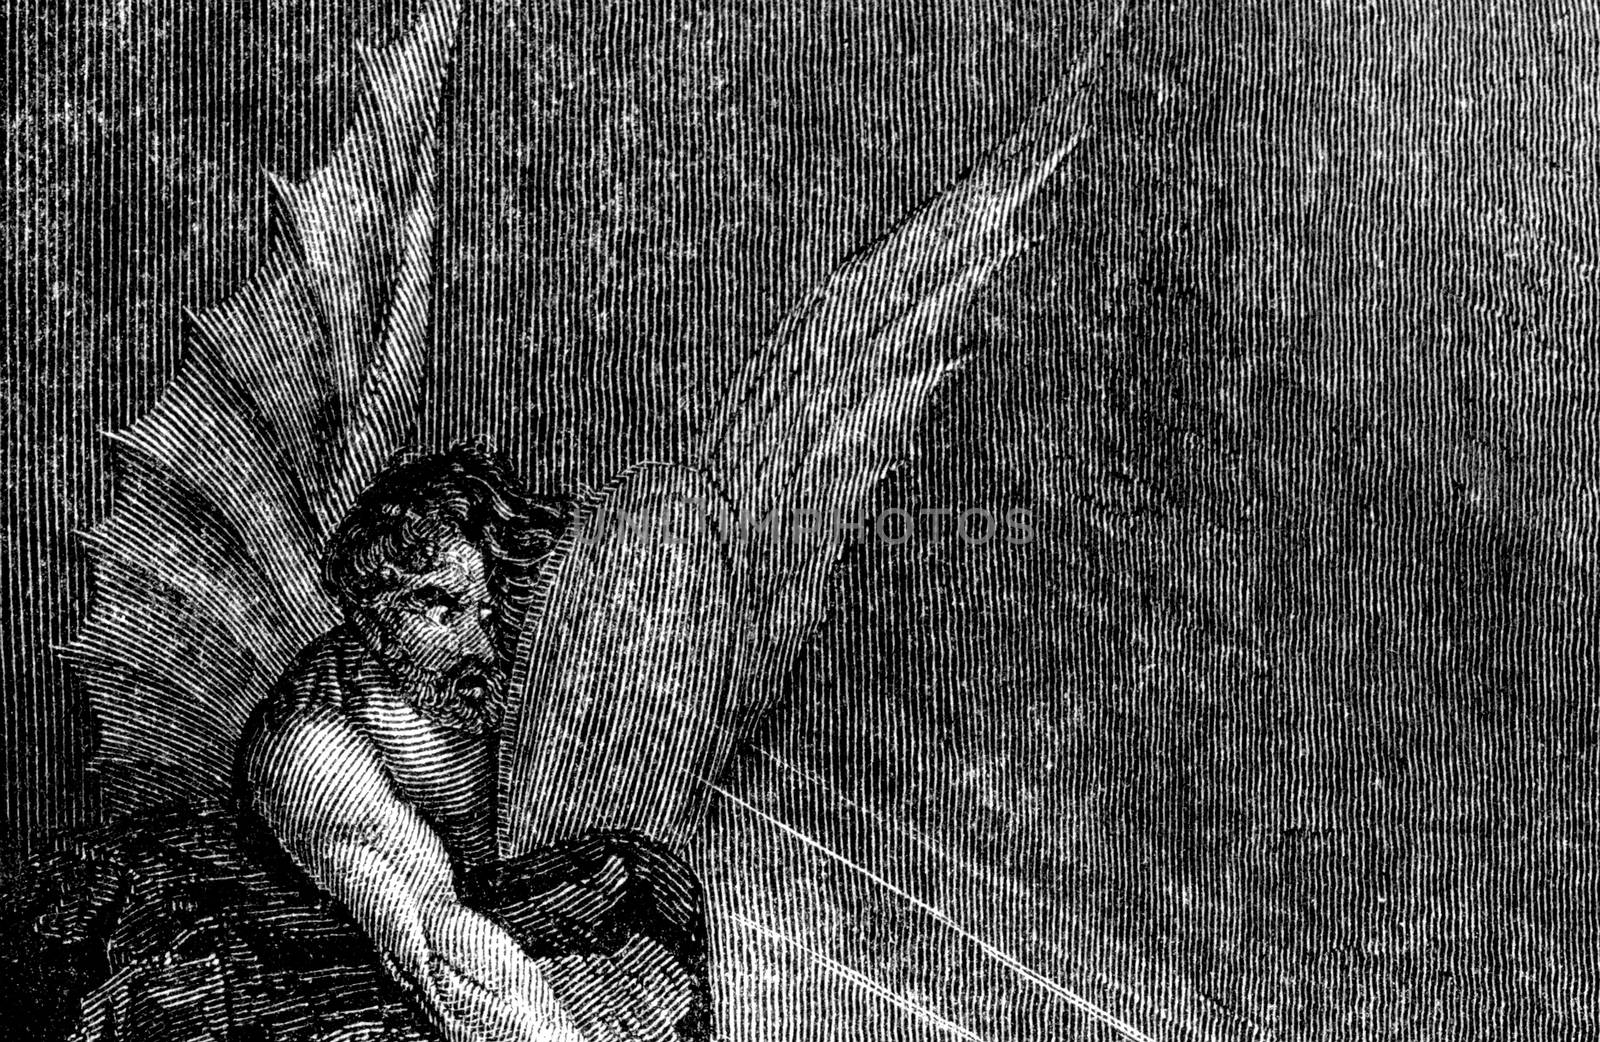 An engraved vintage Bible illustration drawing of Satan the devil from an antique book dated 1836 that is no longer in copyright